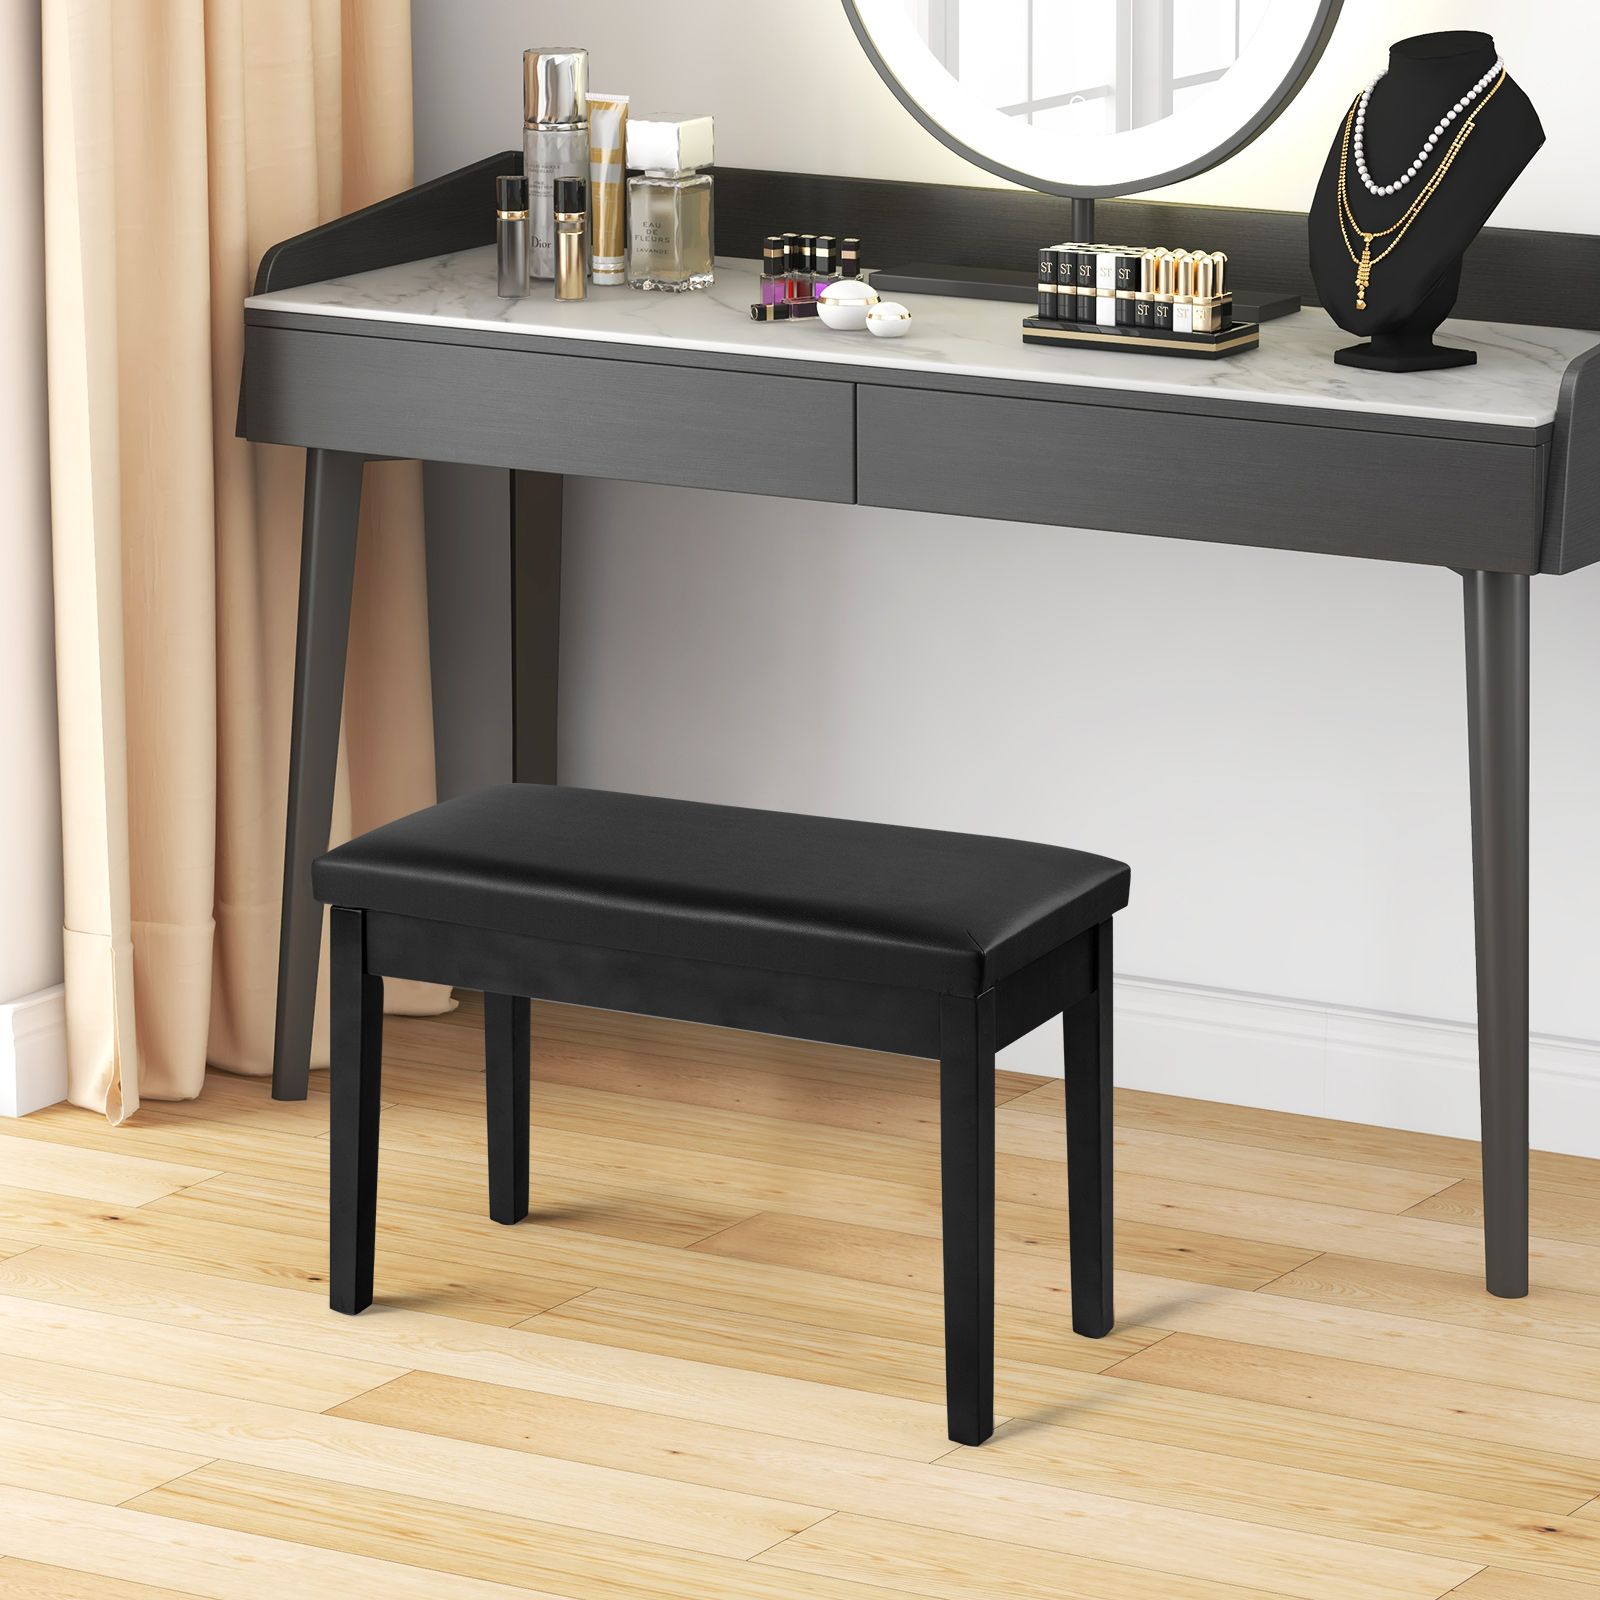 2-in-1 Padded Piano Bench with Storage Space Black